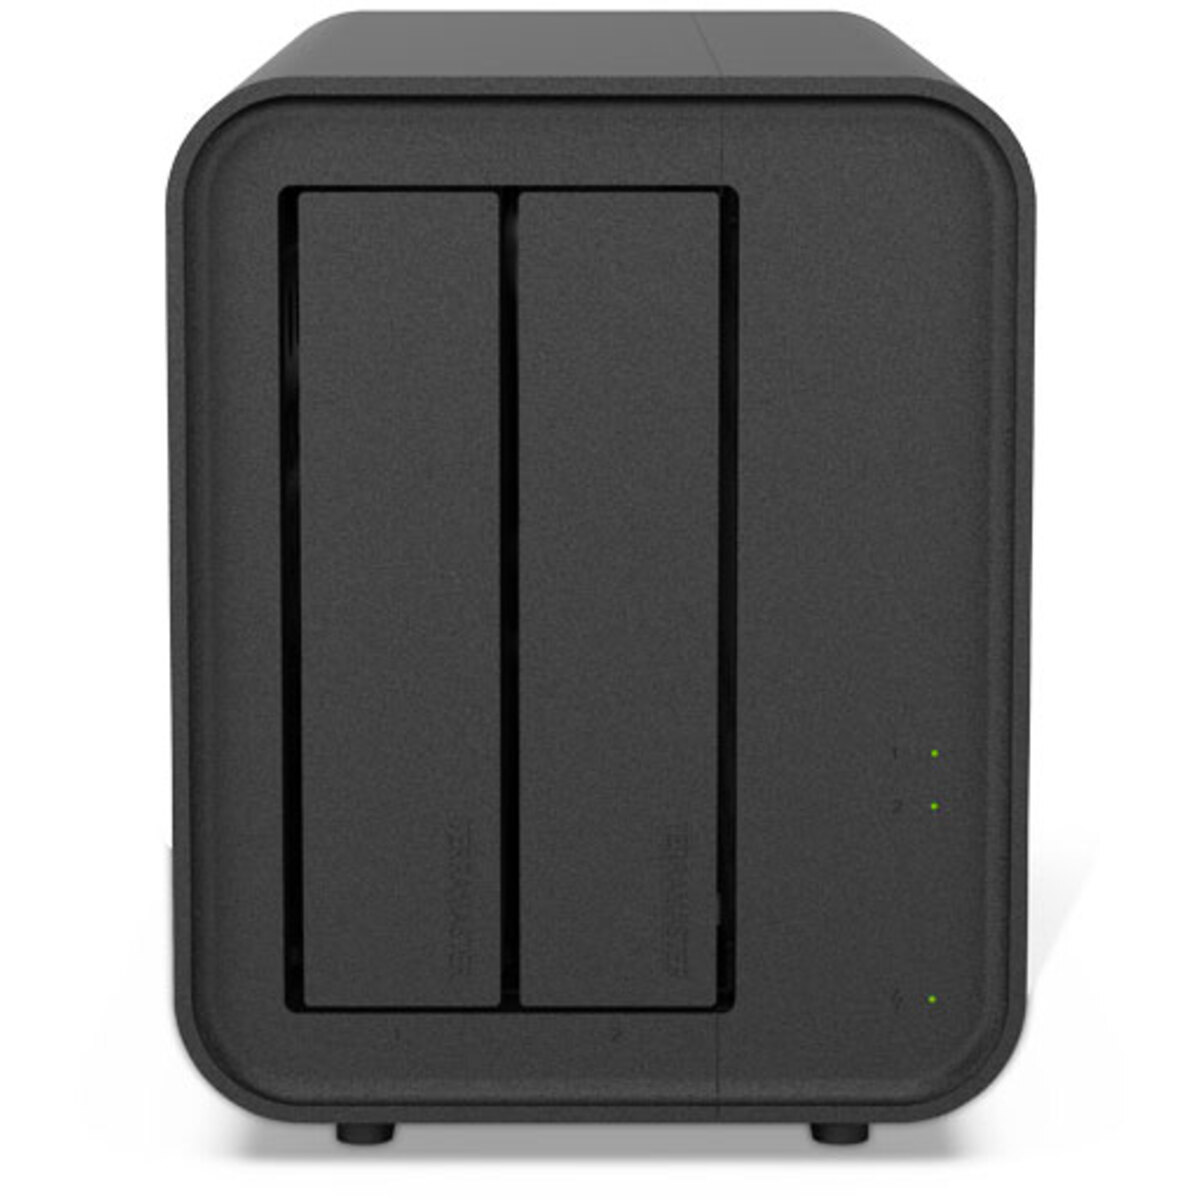 TerraMaster D5 Hybrid 4tb 2-Bay Desktop Multimedia / Power User / Business DAS - Direct Attached Storage Device 2x2tb Sandisk Ultra 3D SDSSDH3-2T00 2.5 560/520MB/s SATA 6Gb/s SSD CONSUMER Class Drives Installed - Burn-In Tested D5 Hybrid